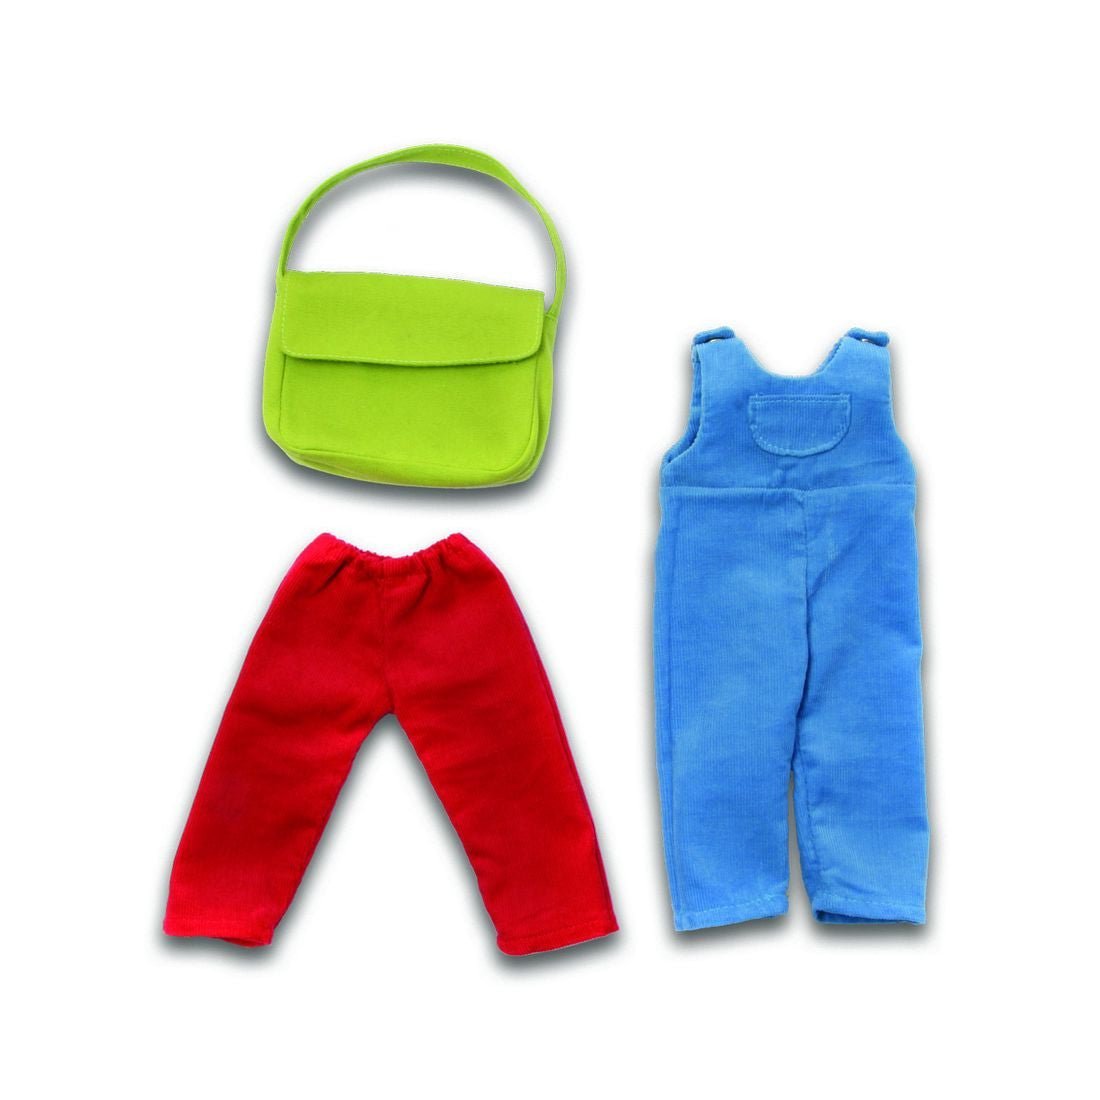 Pants, Overalls and Purse Set - challengeandfunretail